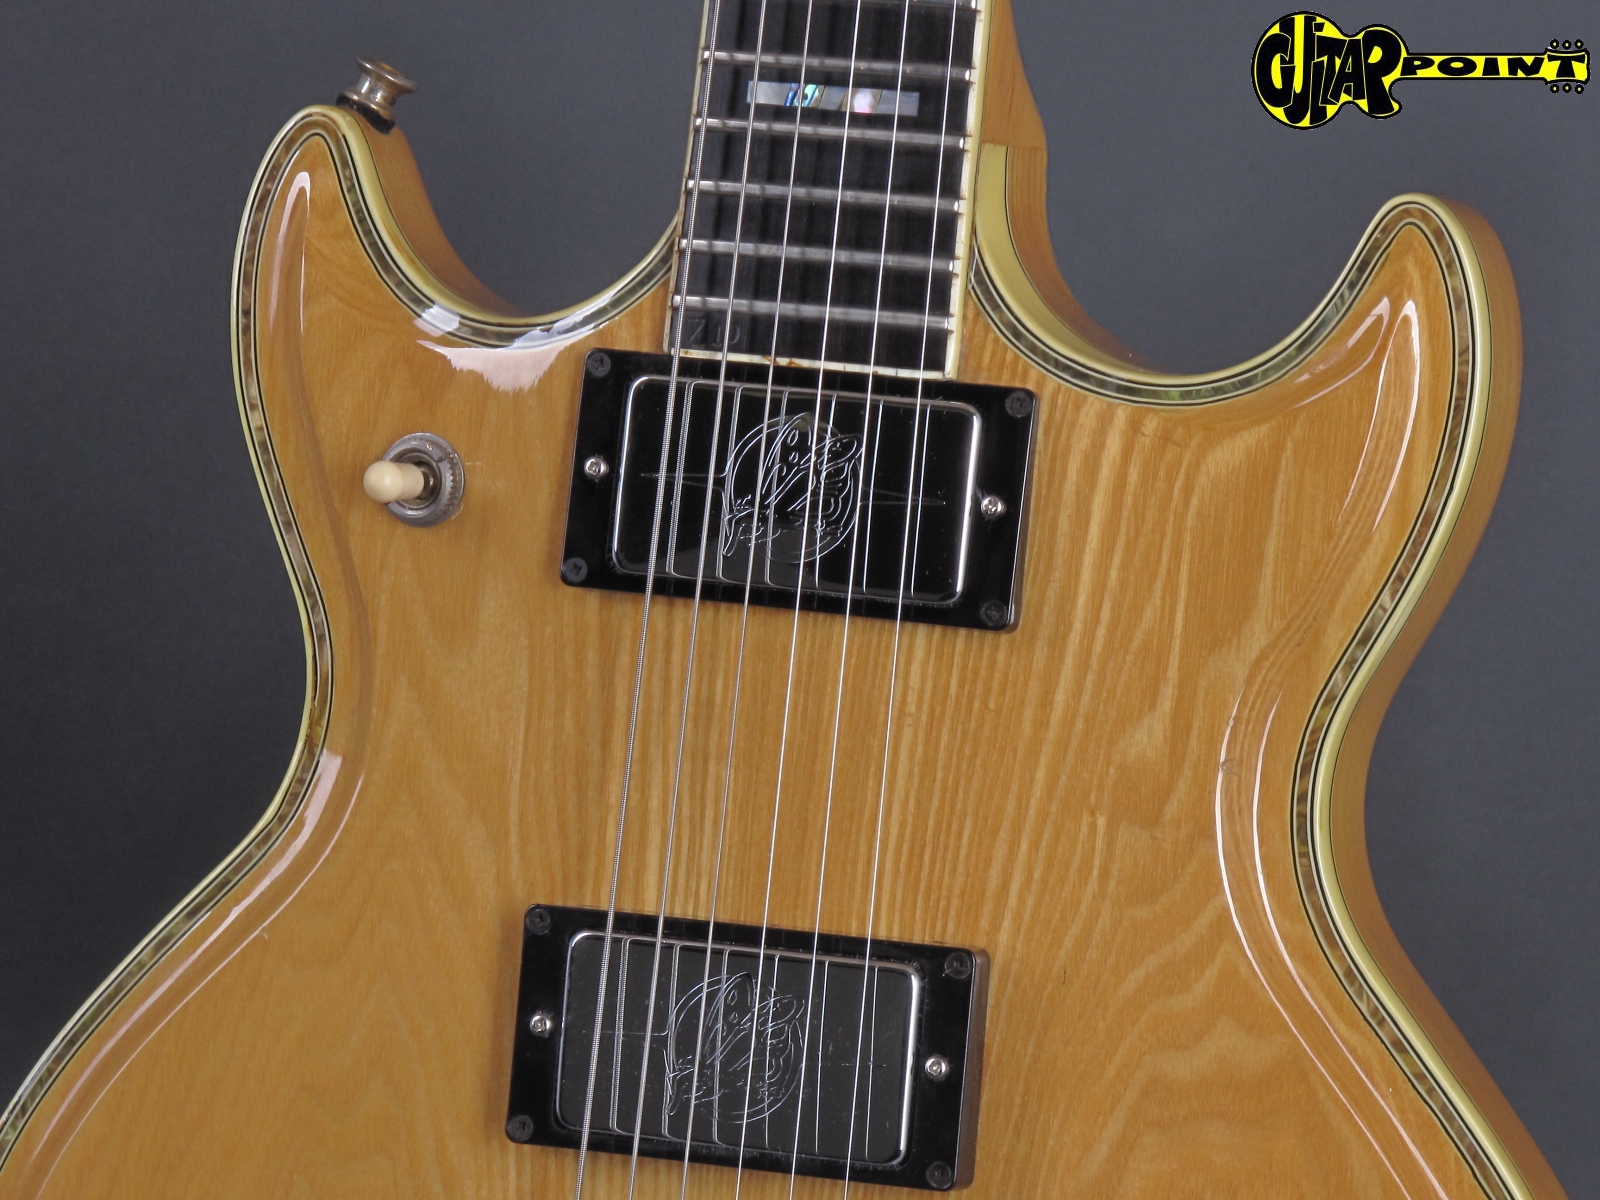 Ibanez Artist 2617 1977 Natural Guitar For Sale GuitarPoint
